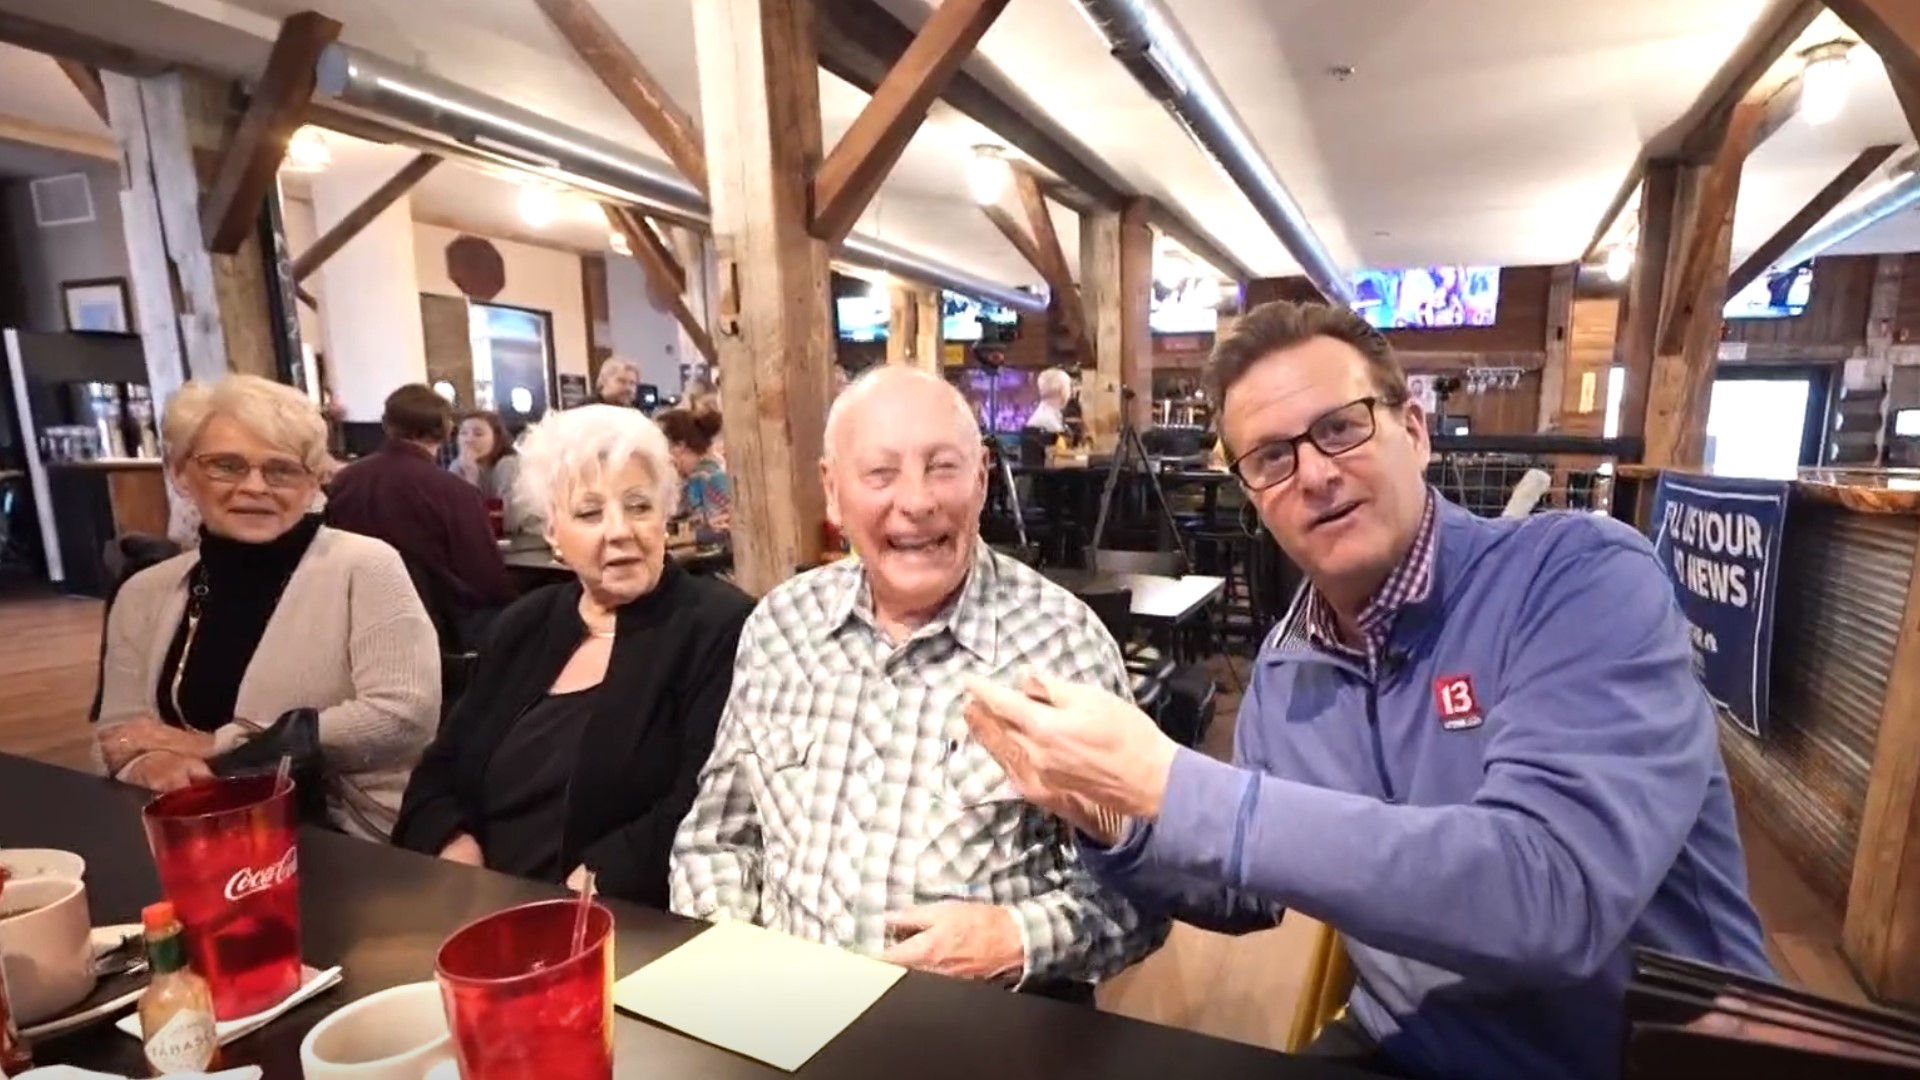 Dave Calabro caught up with folks at The Depot for a little bit of good news!